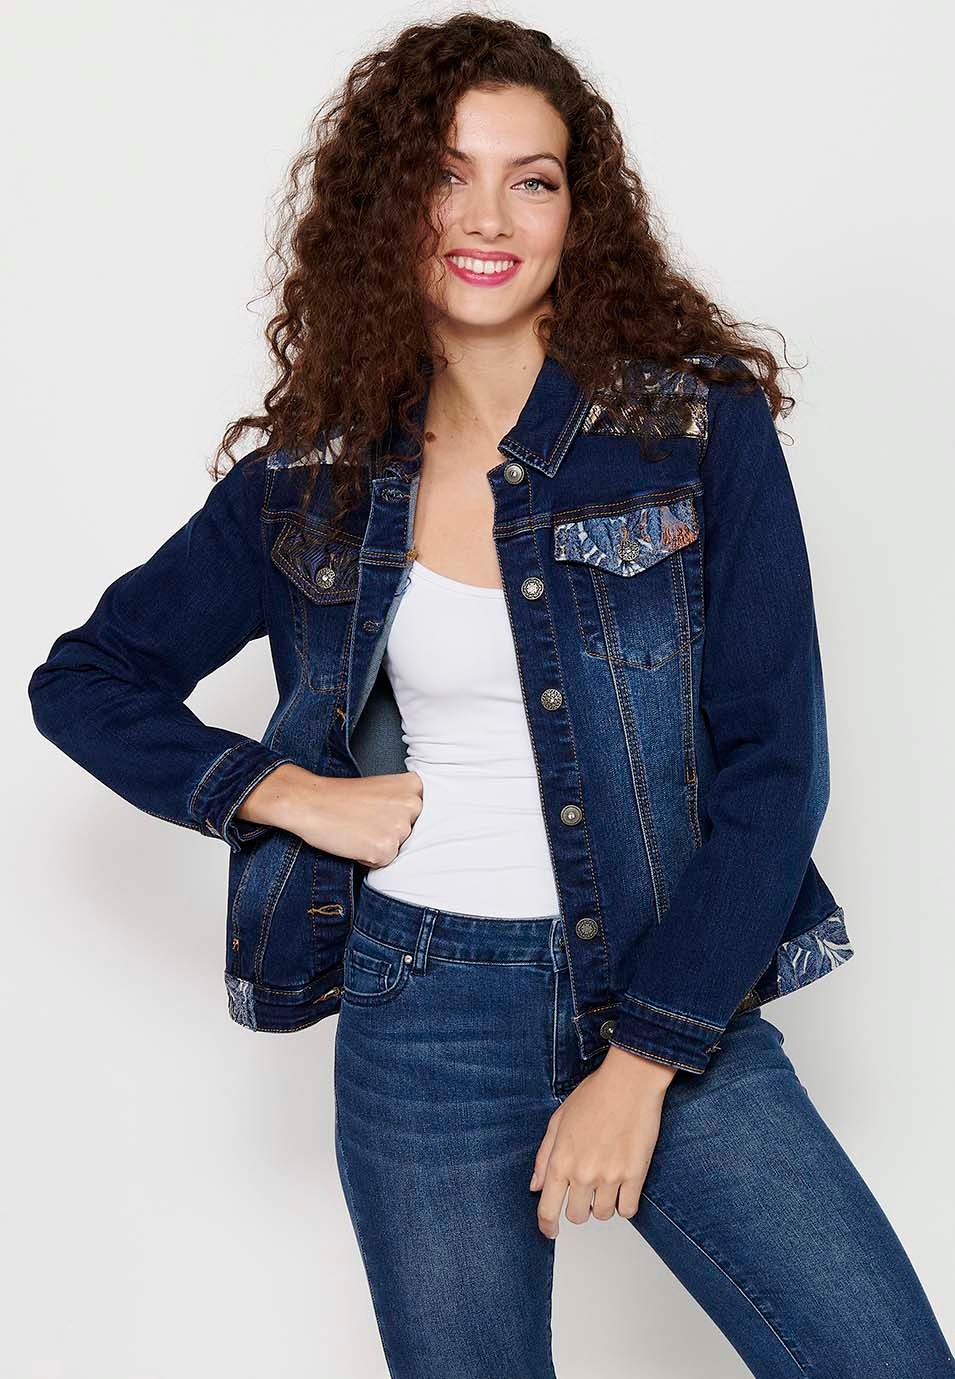 Dark Blue Long Sleeve Denim Jacket with Button Front Closure and Pockets with Embroidery on the Shoulders for Women 10